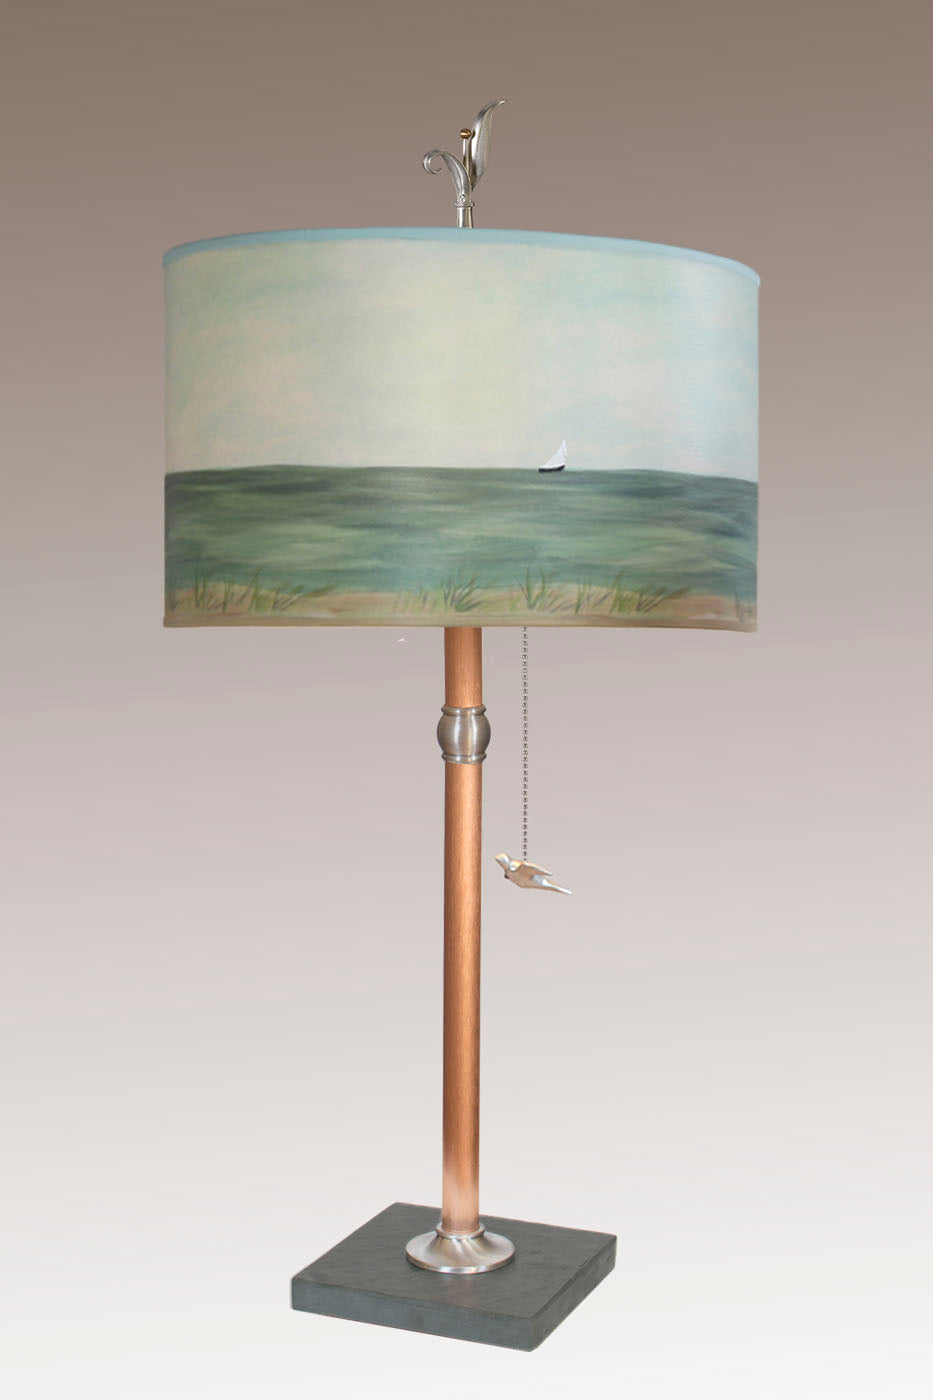 Copper Table Lamp with Large Drum Shade in Shore